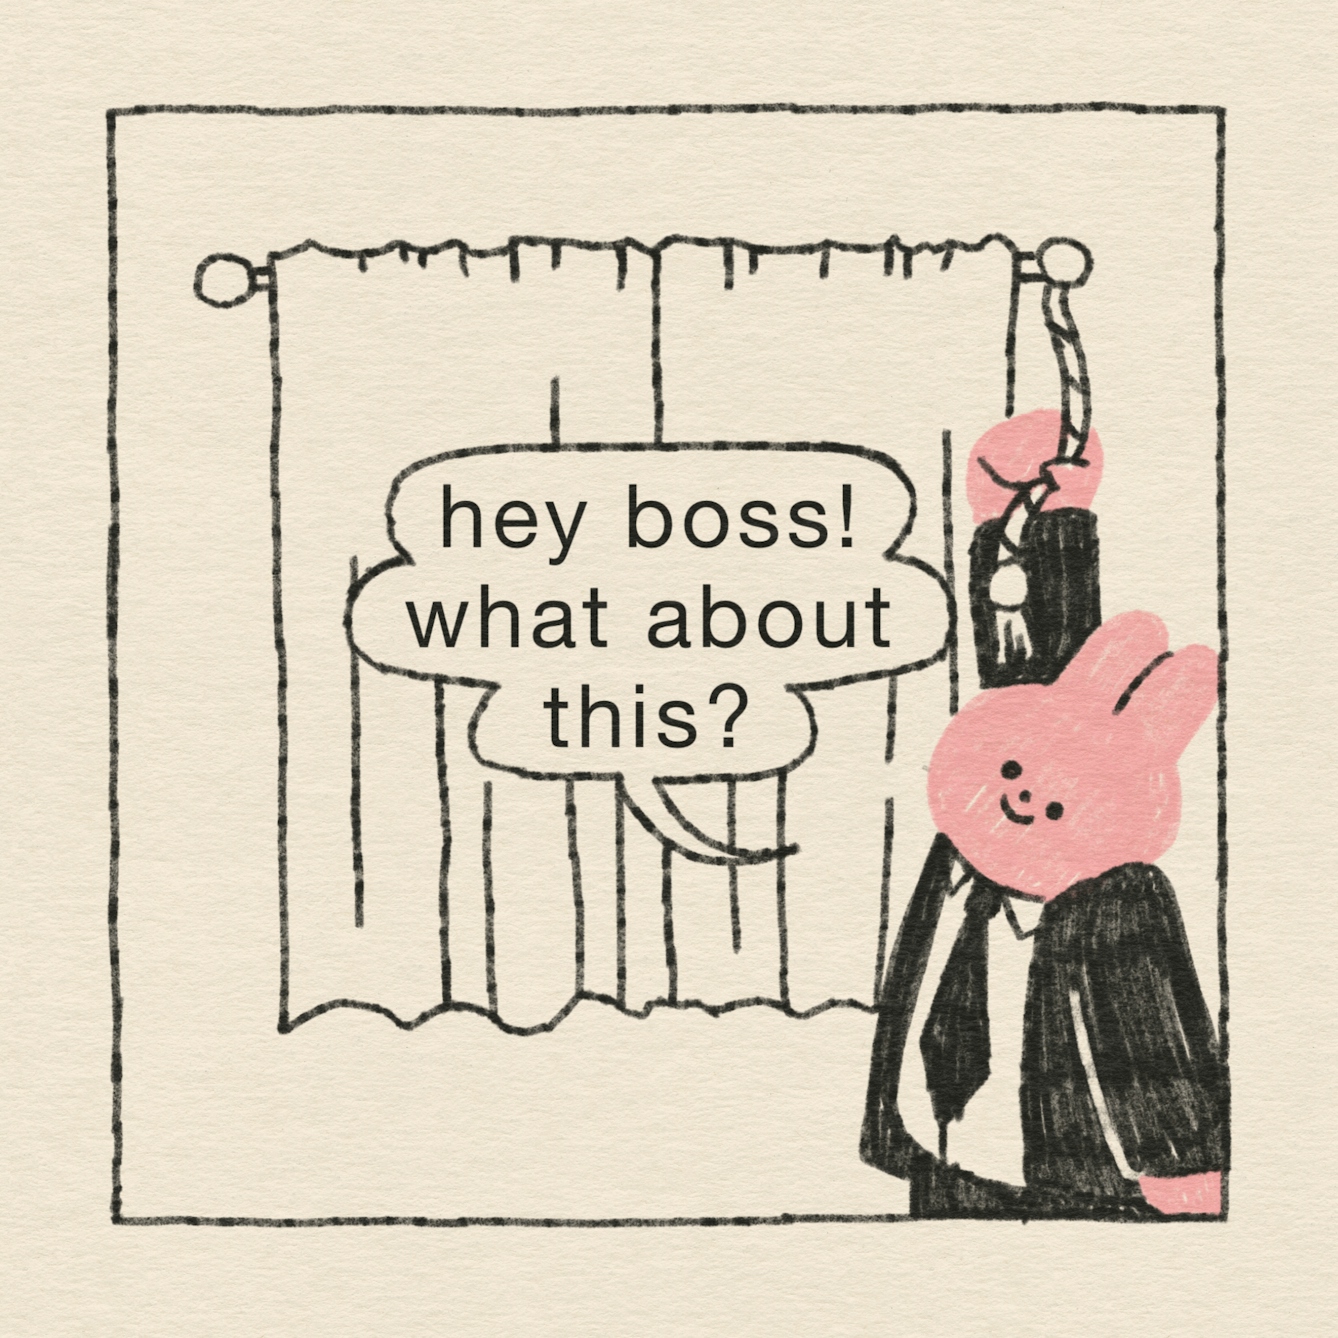 Panel 1 of 4: A pink rabbit in a black suit and tie stands in front of a curtain, ready to unveil their proposal for an advert. “Hey boss! What about this?”, he says with an excited expression.